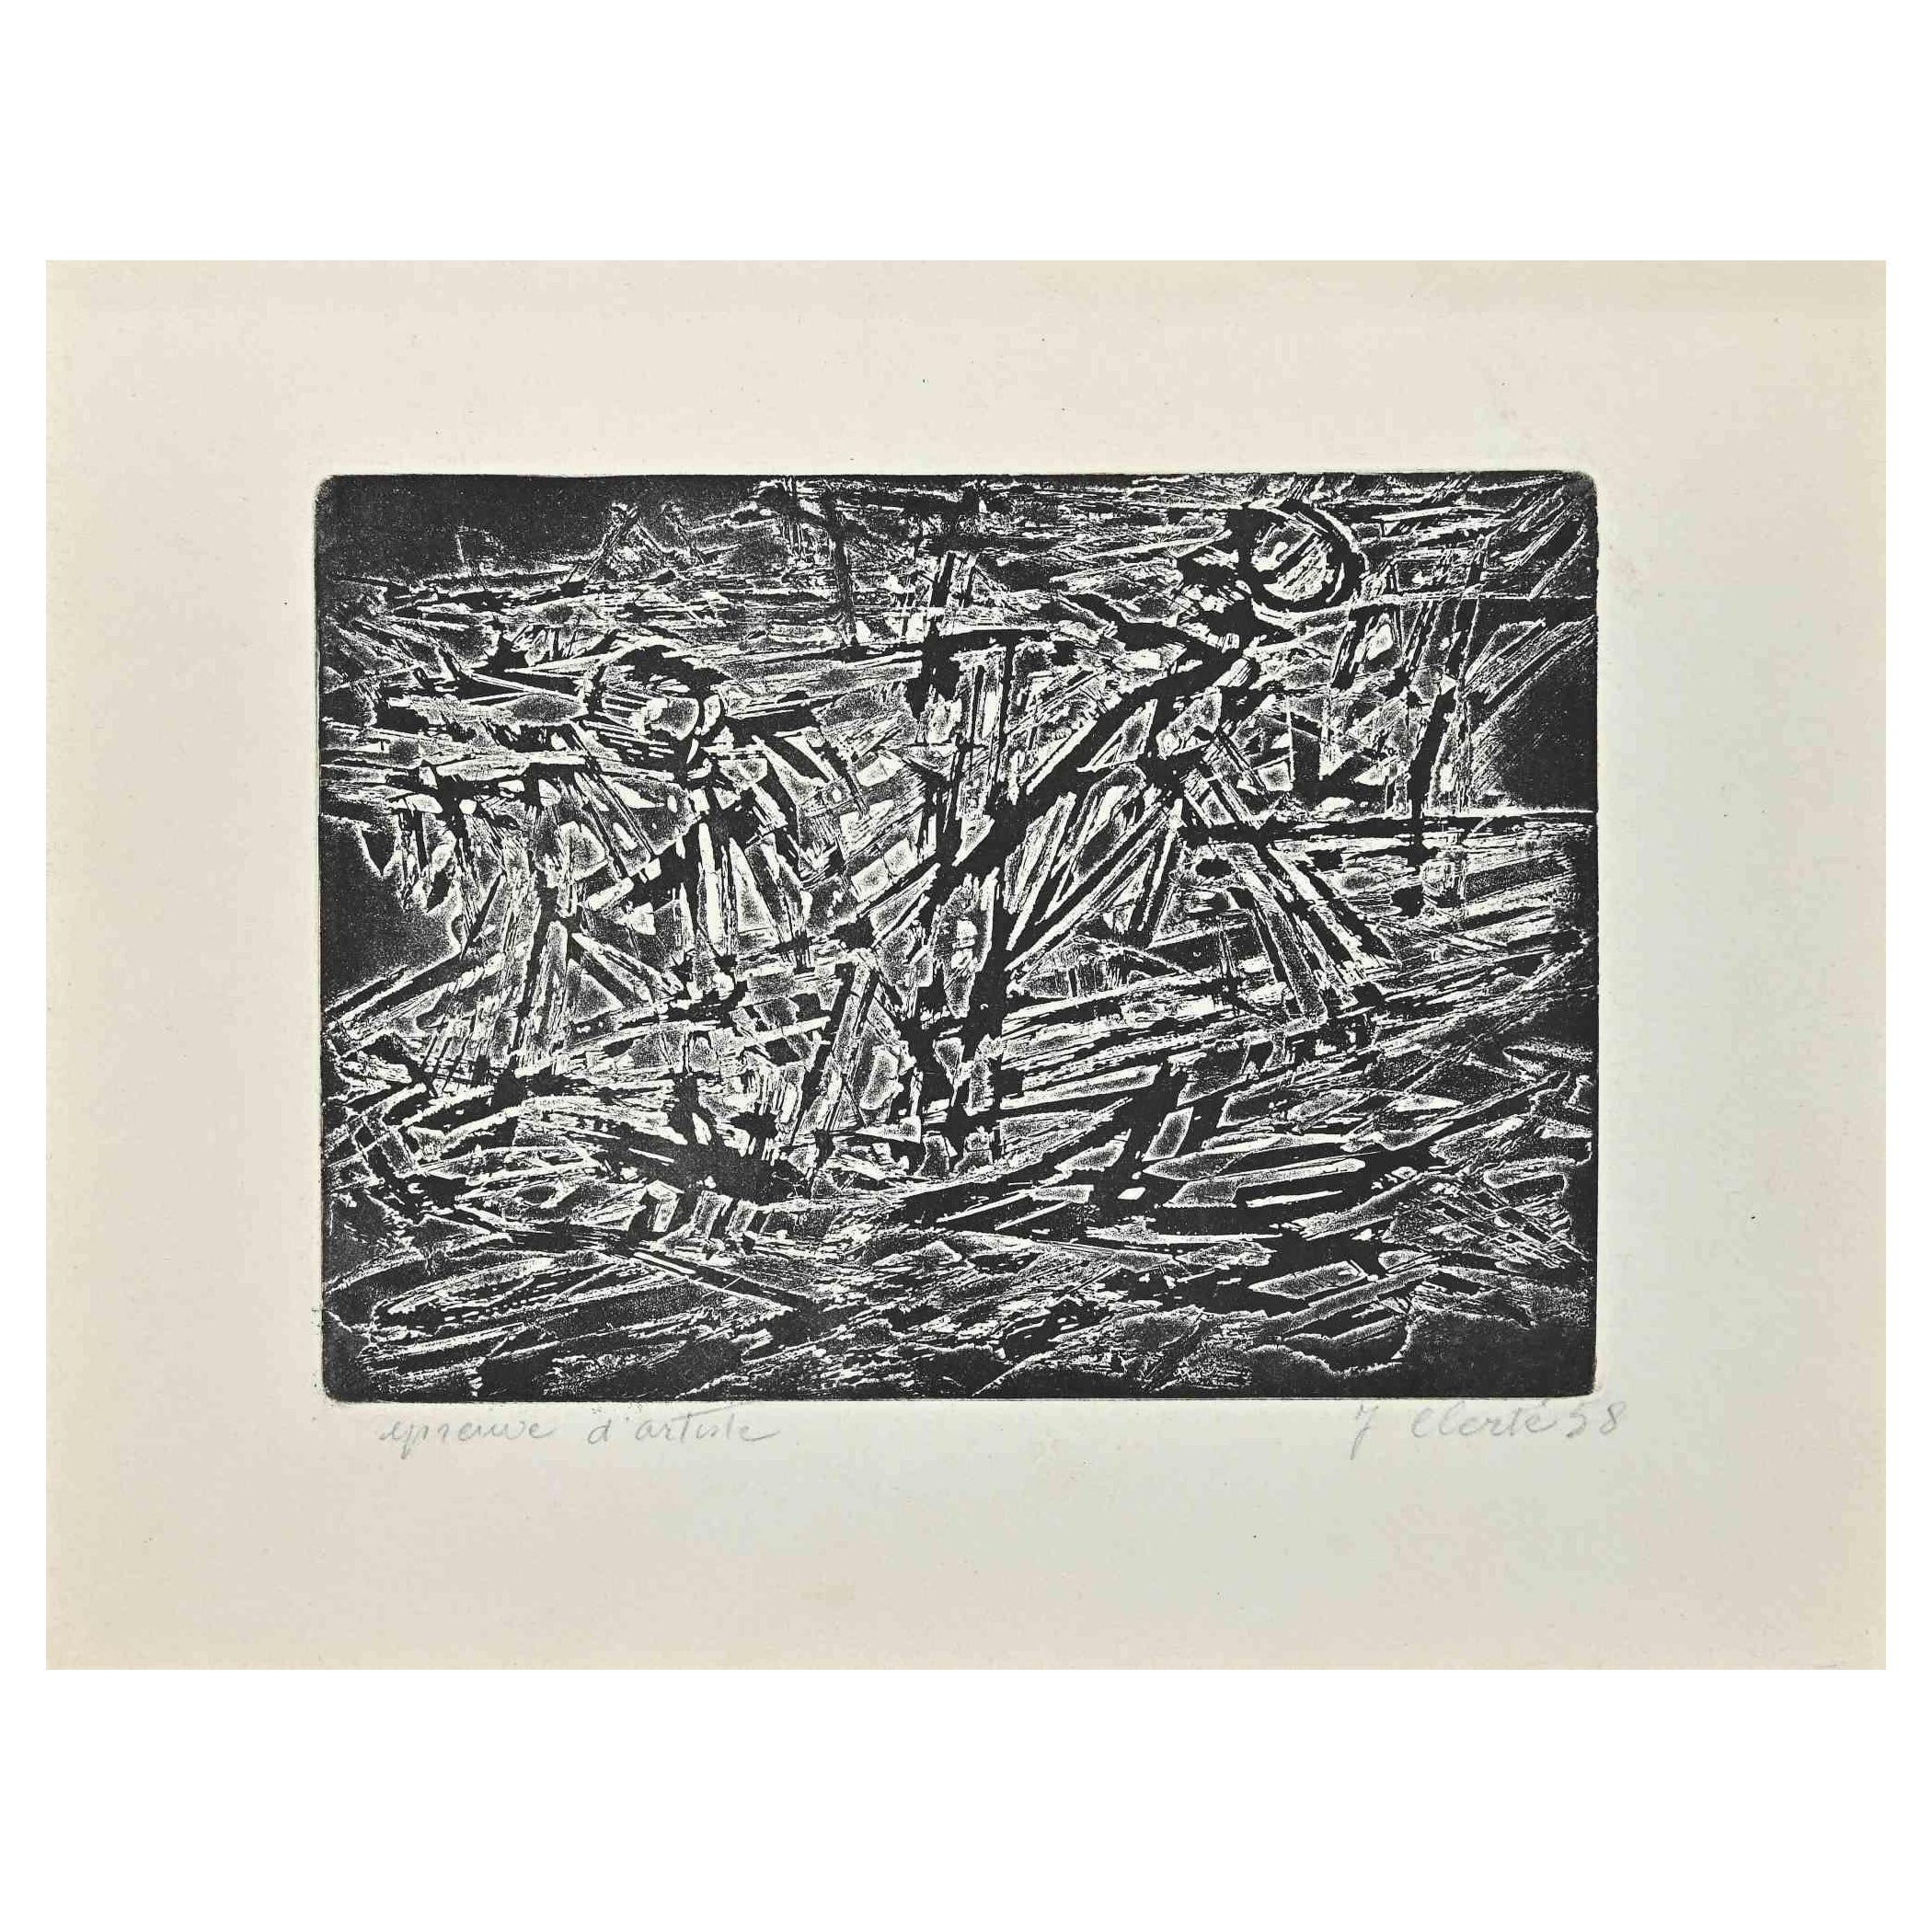 Abstract Composition is an original Etching realized by Jean Clerté in the 1980s.

The artwork is depicted through confident strokes in a well-balanced composition.